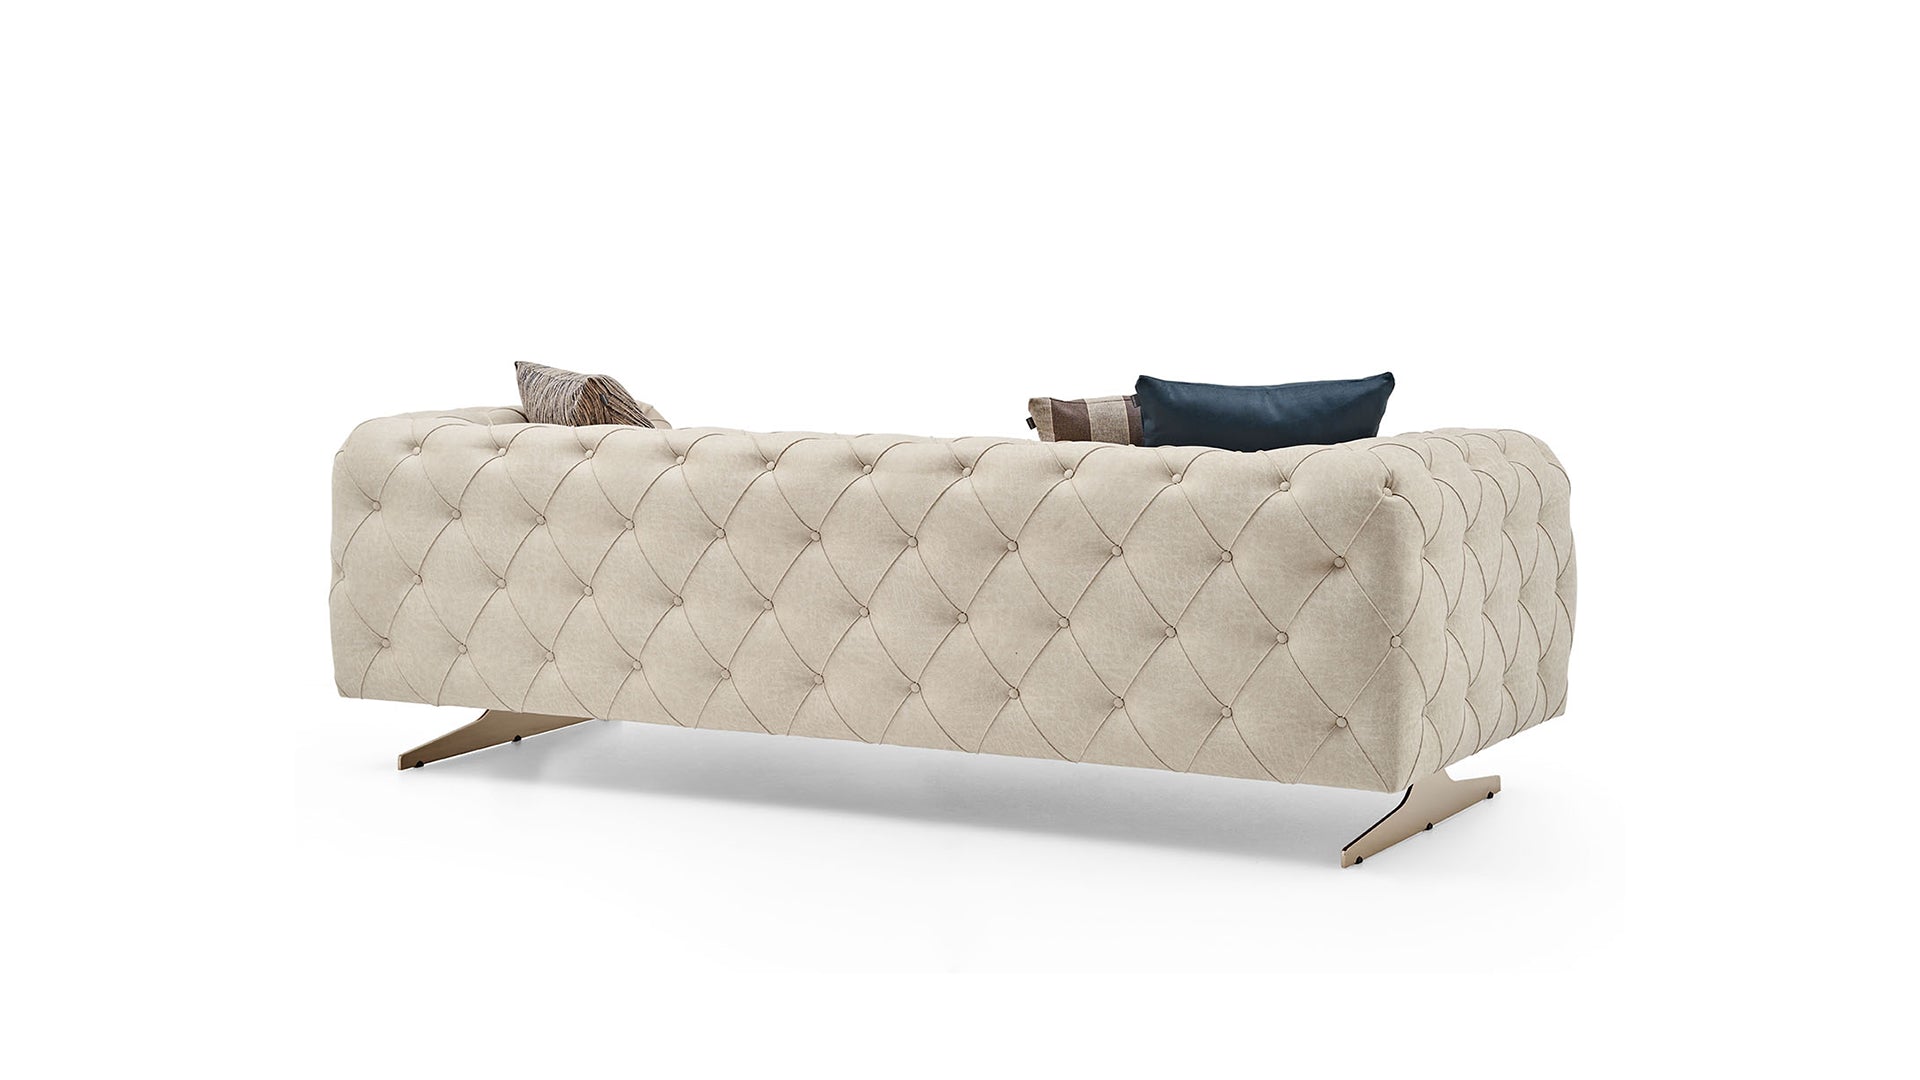 Allegra 3 Seater Quilted Sofa